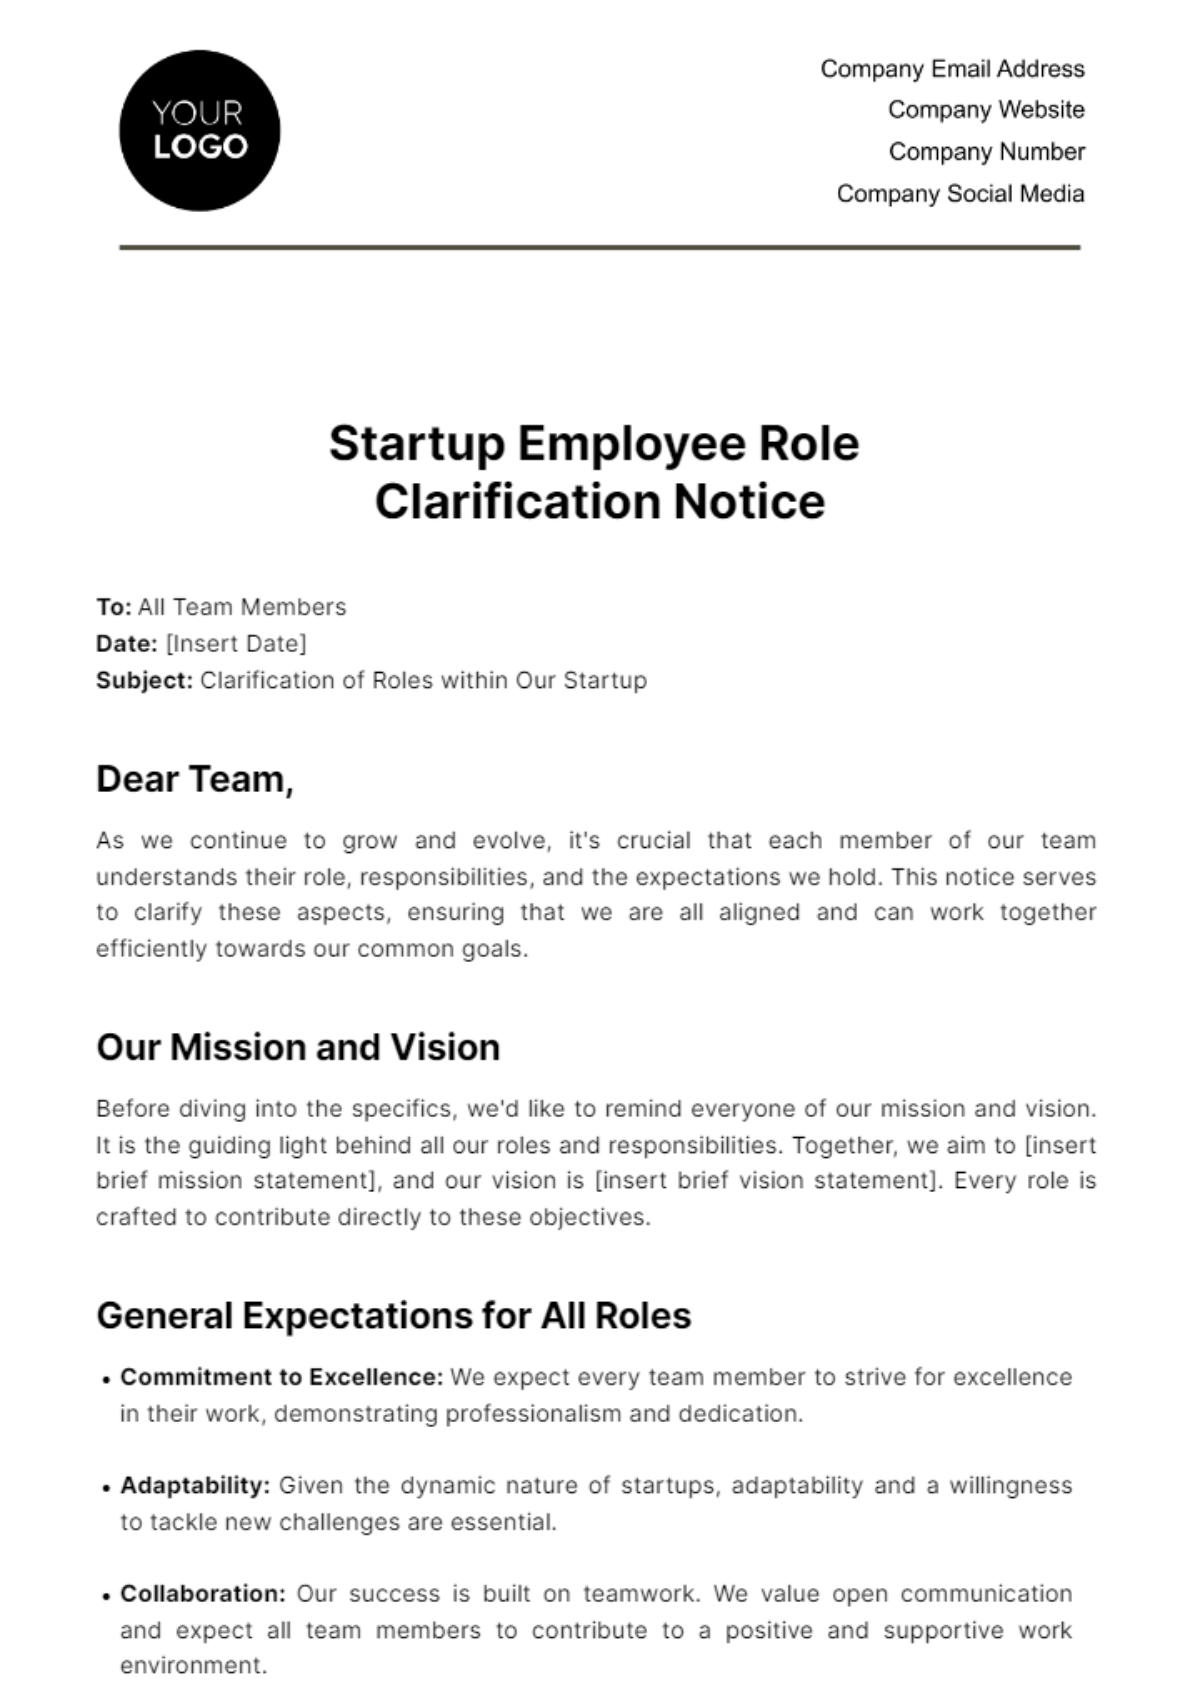 Free Startup Employee Role Clarification Notice Template